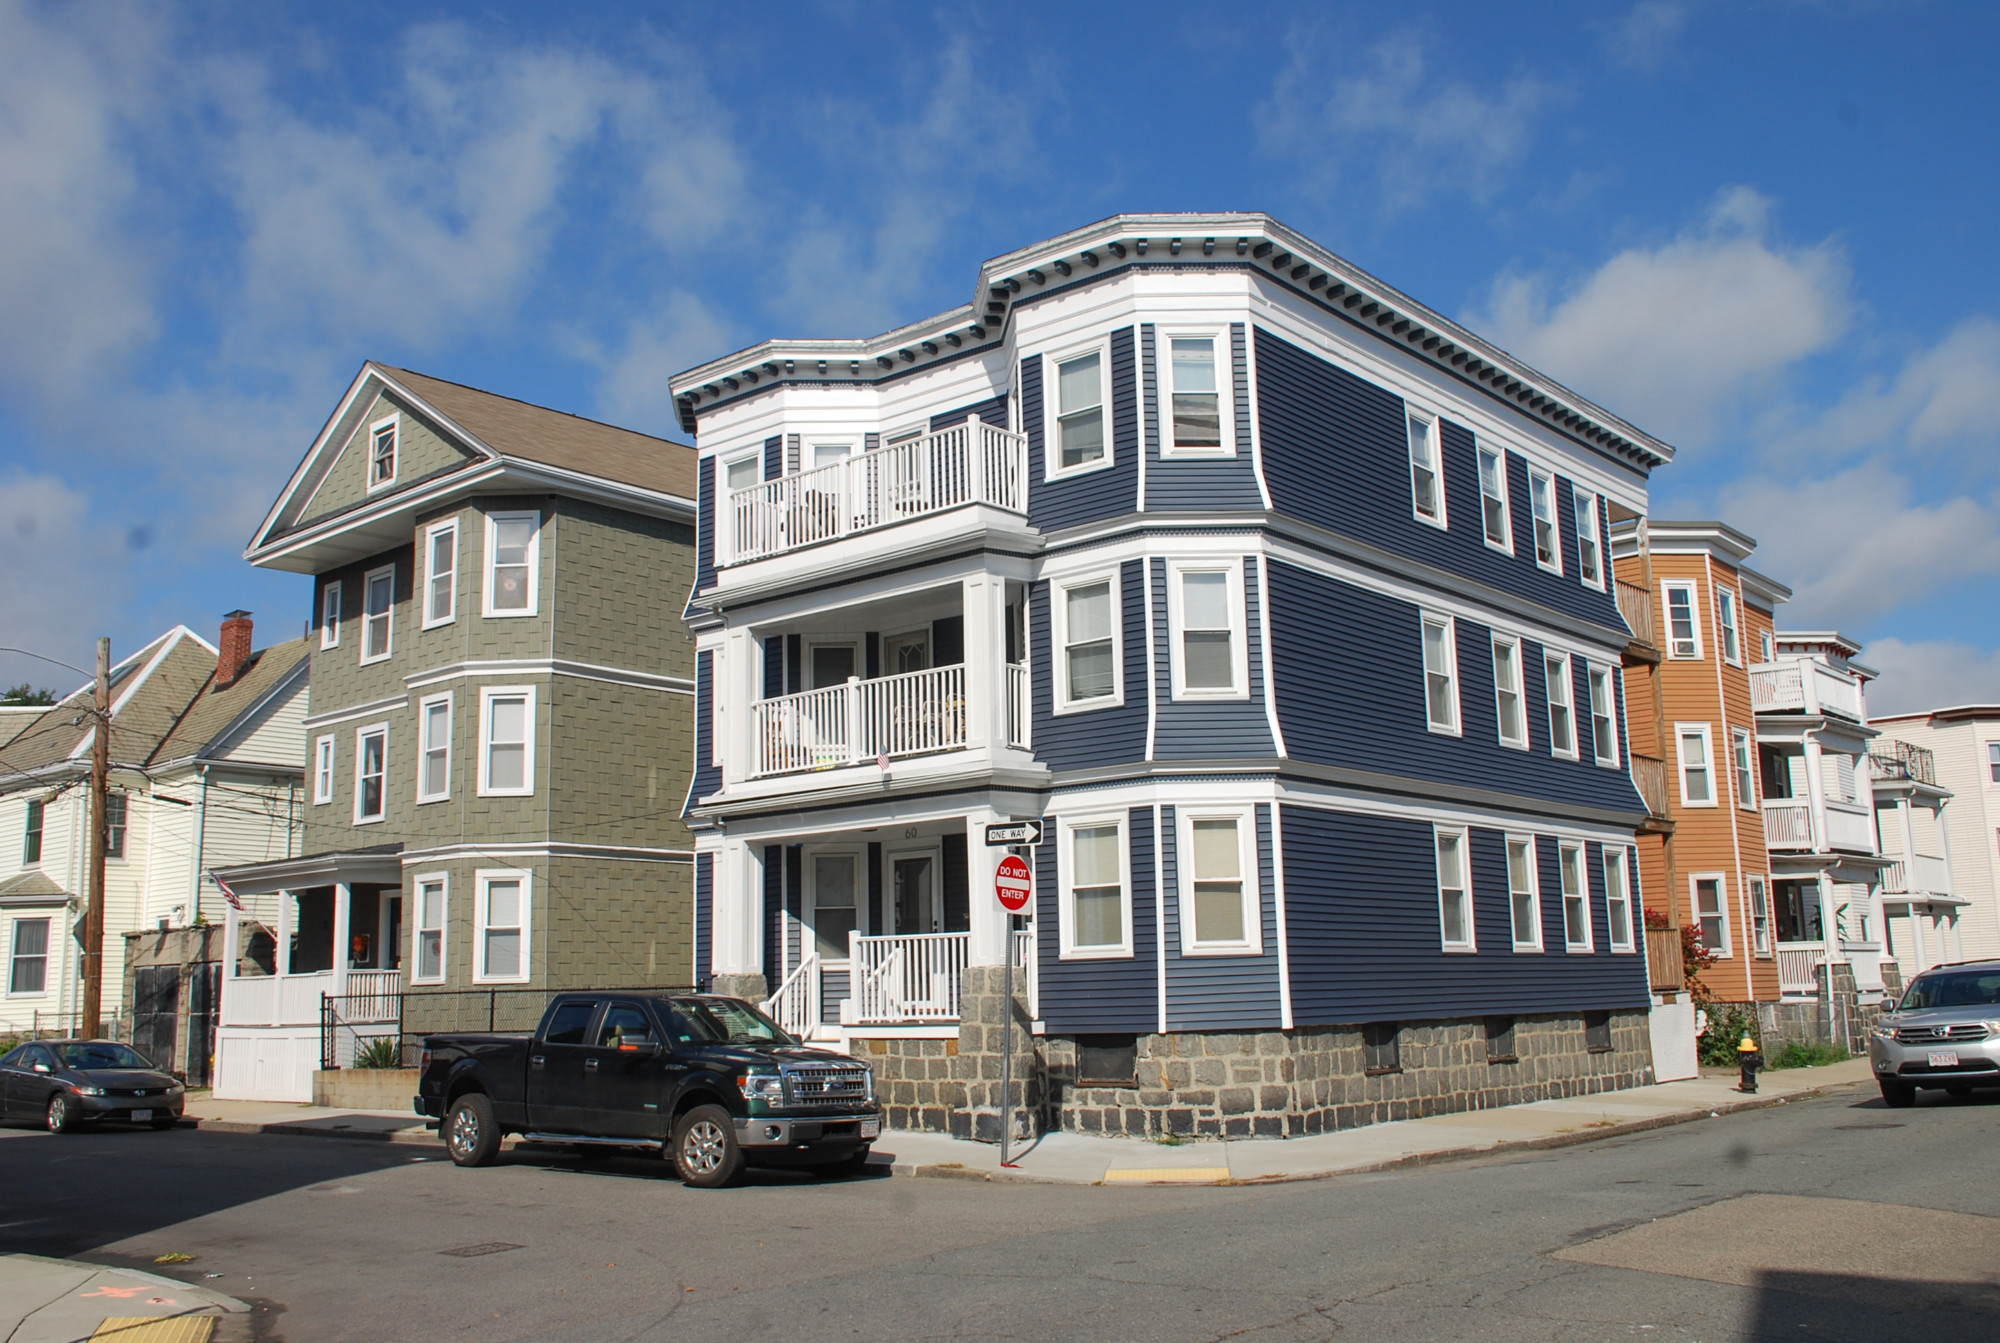 Triplex: Stacked — Missing Middle Housing